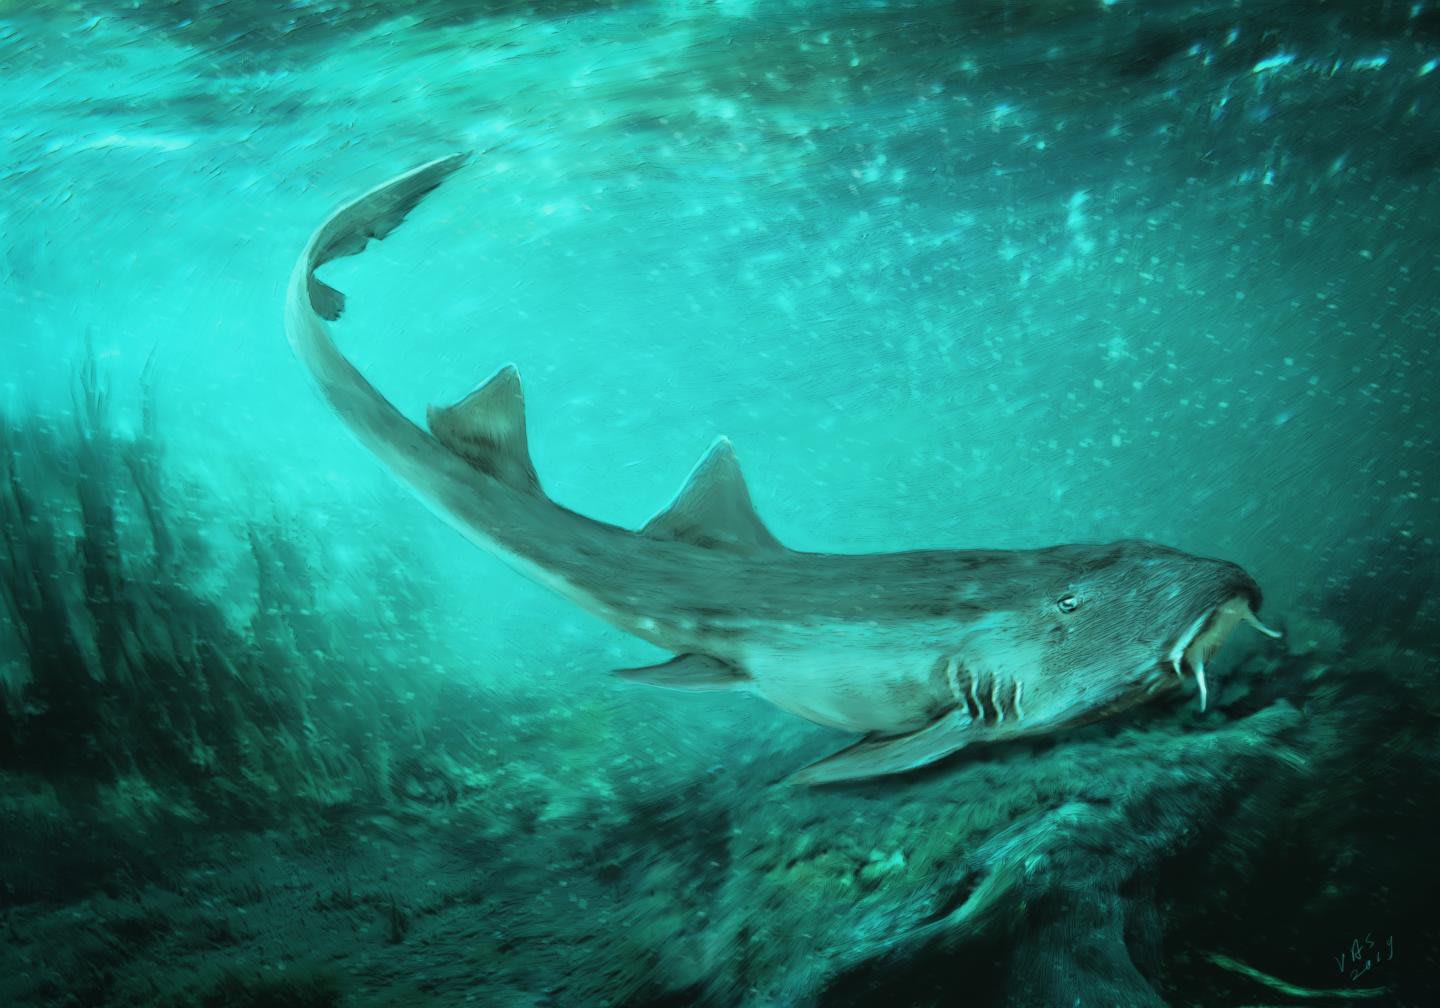 New Prehistoric Shark Species Discovered Alongside Sue the T. Rex